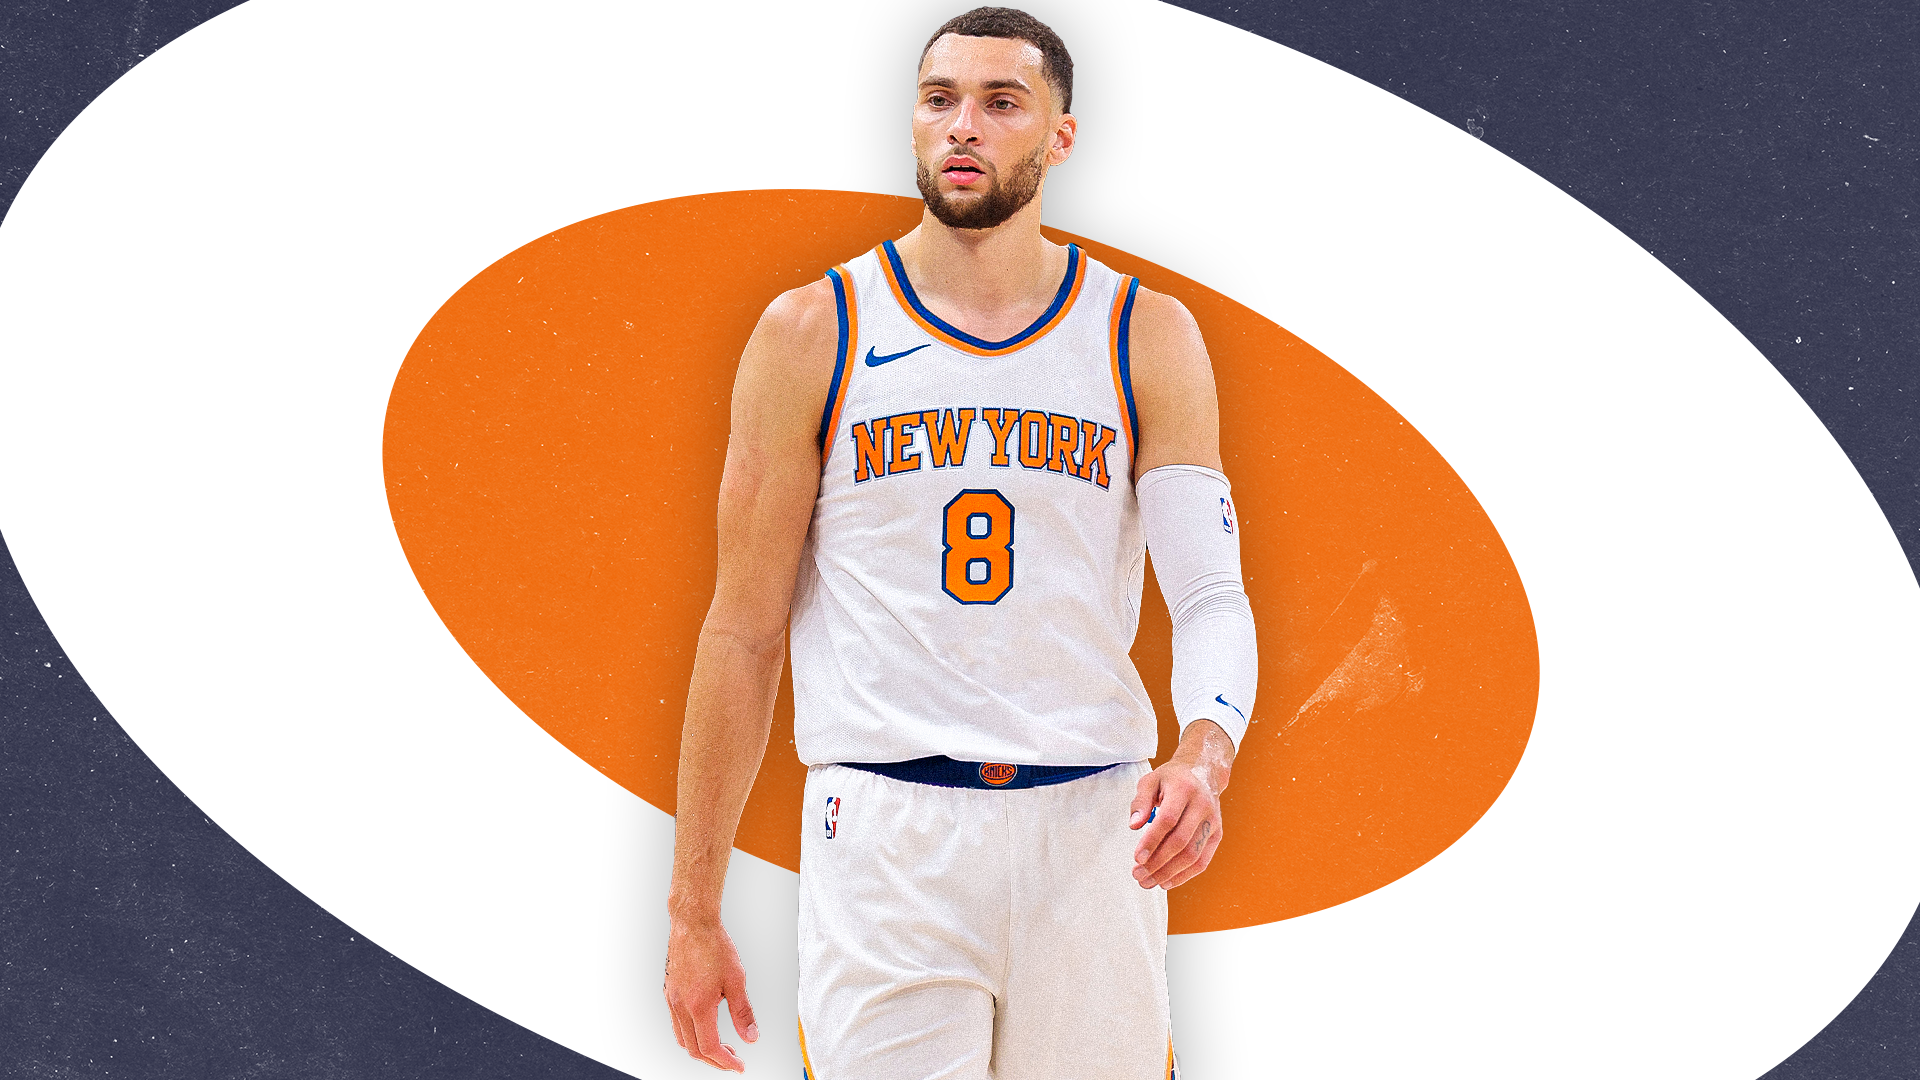 Anyone else agree that these are the best Knicks jerseys ever